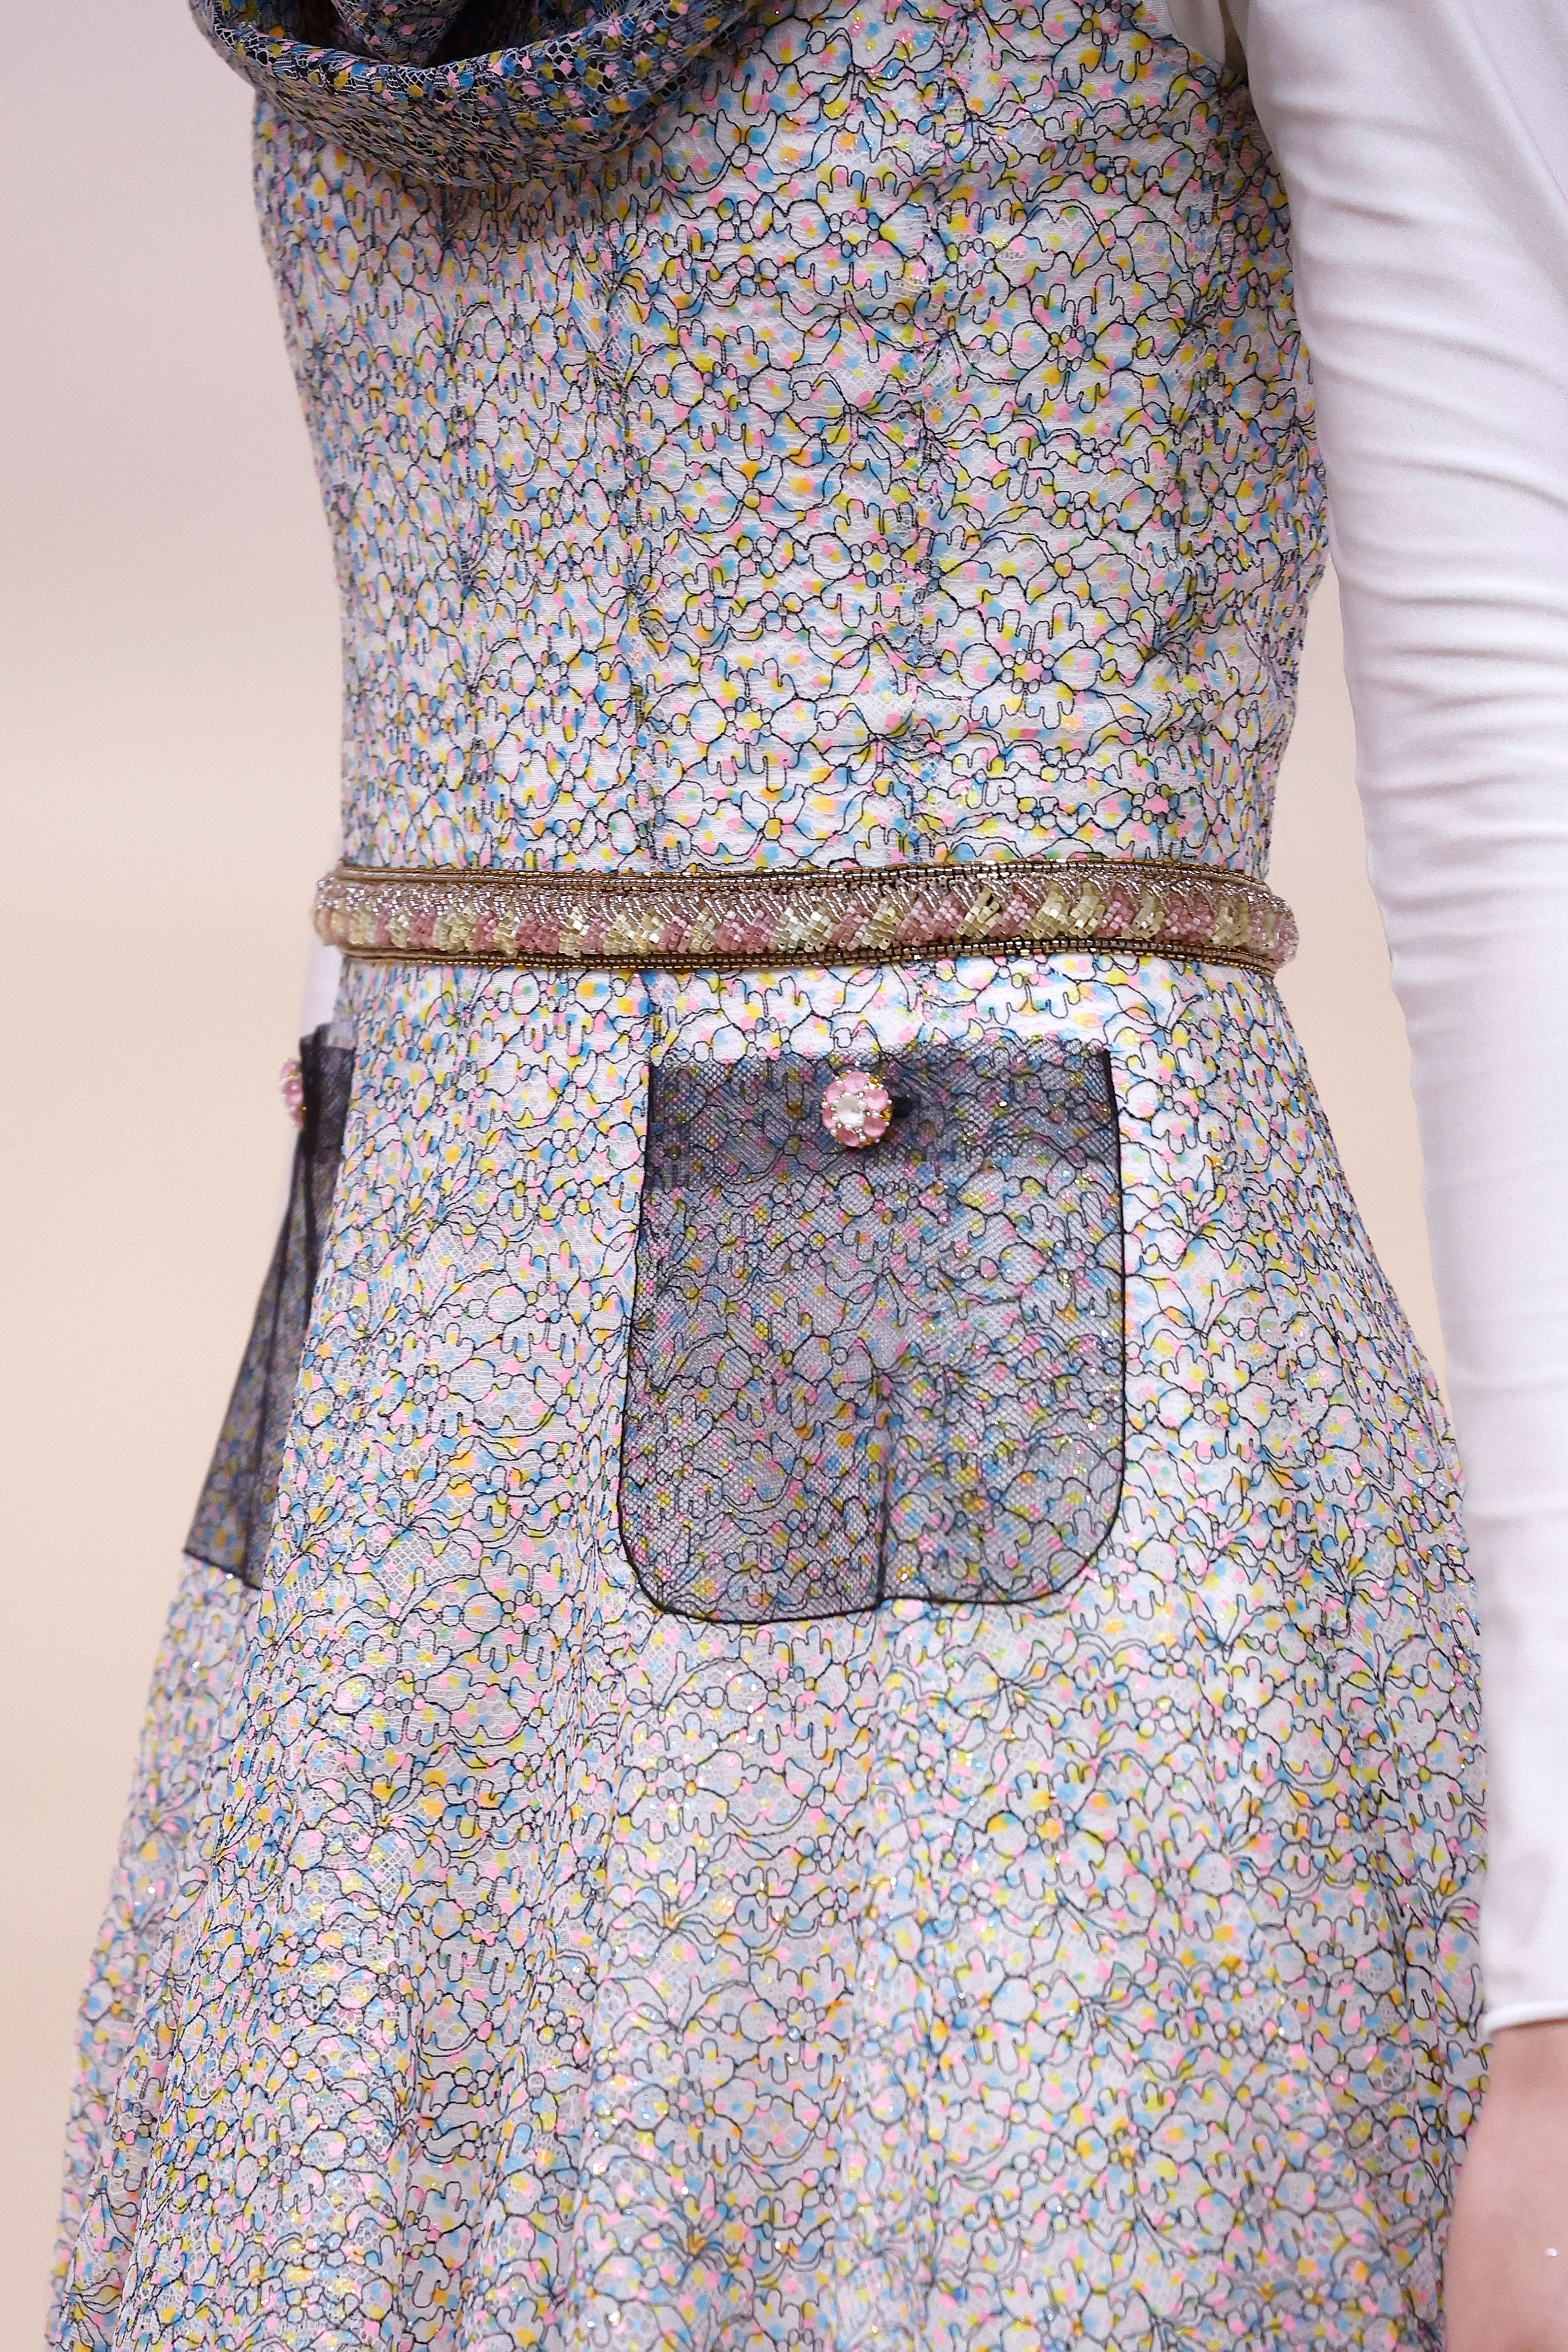 A delicate sheer pocket seen at Chanel's haute couture show.